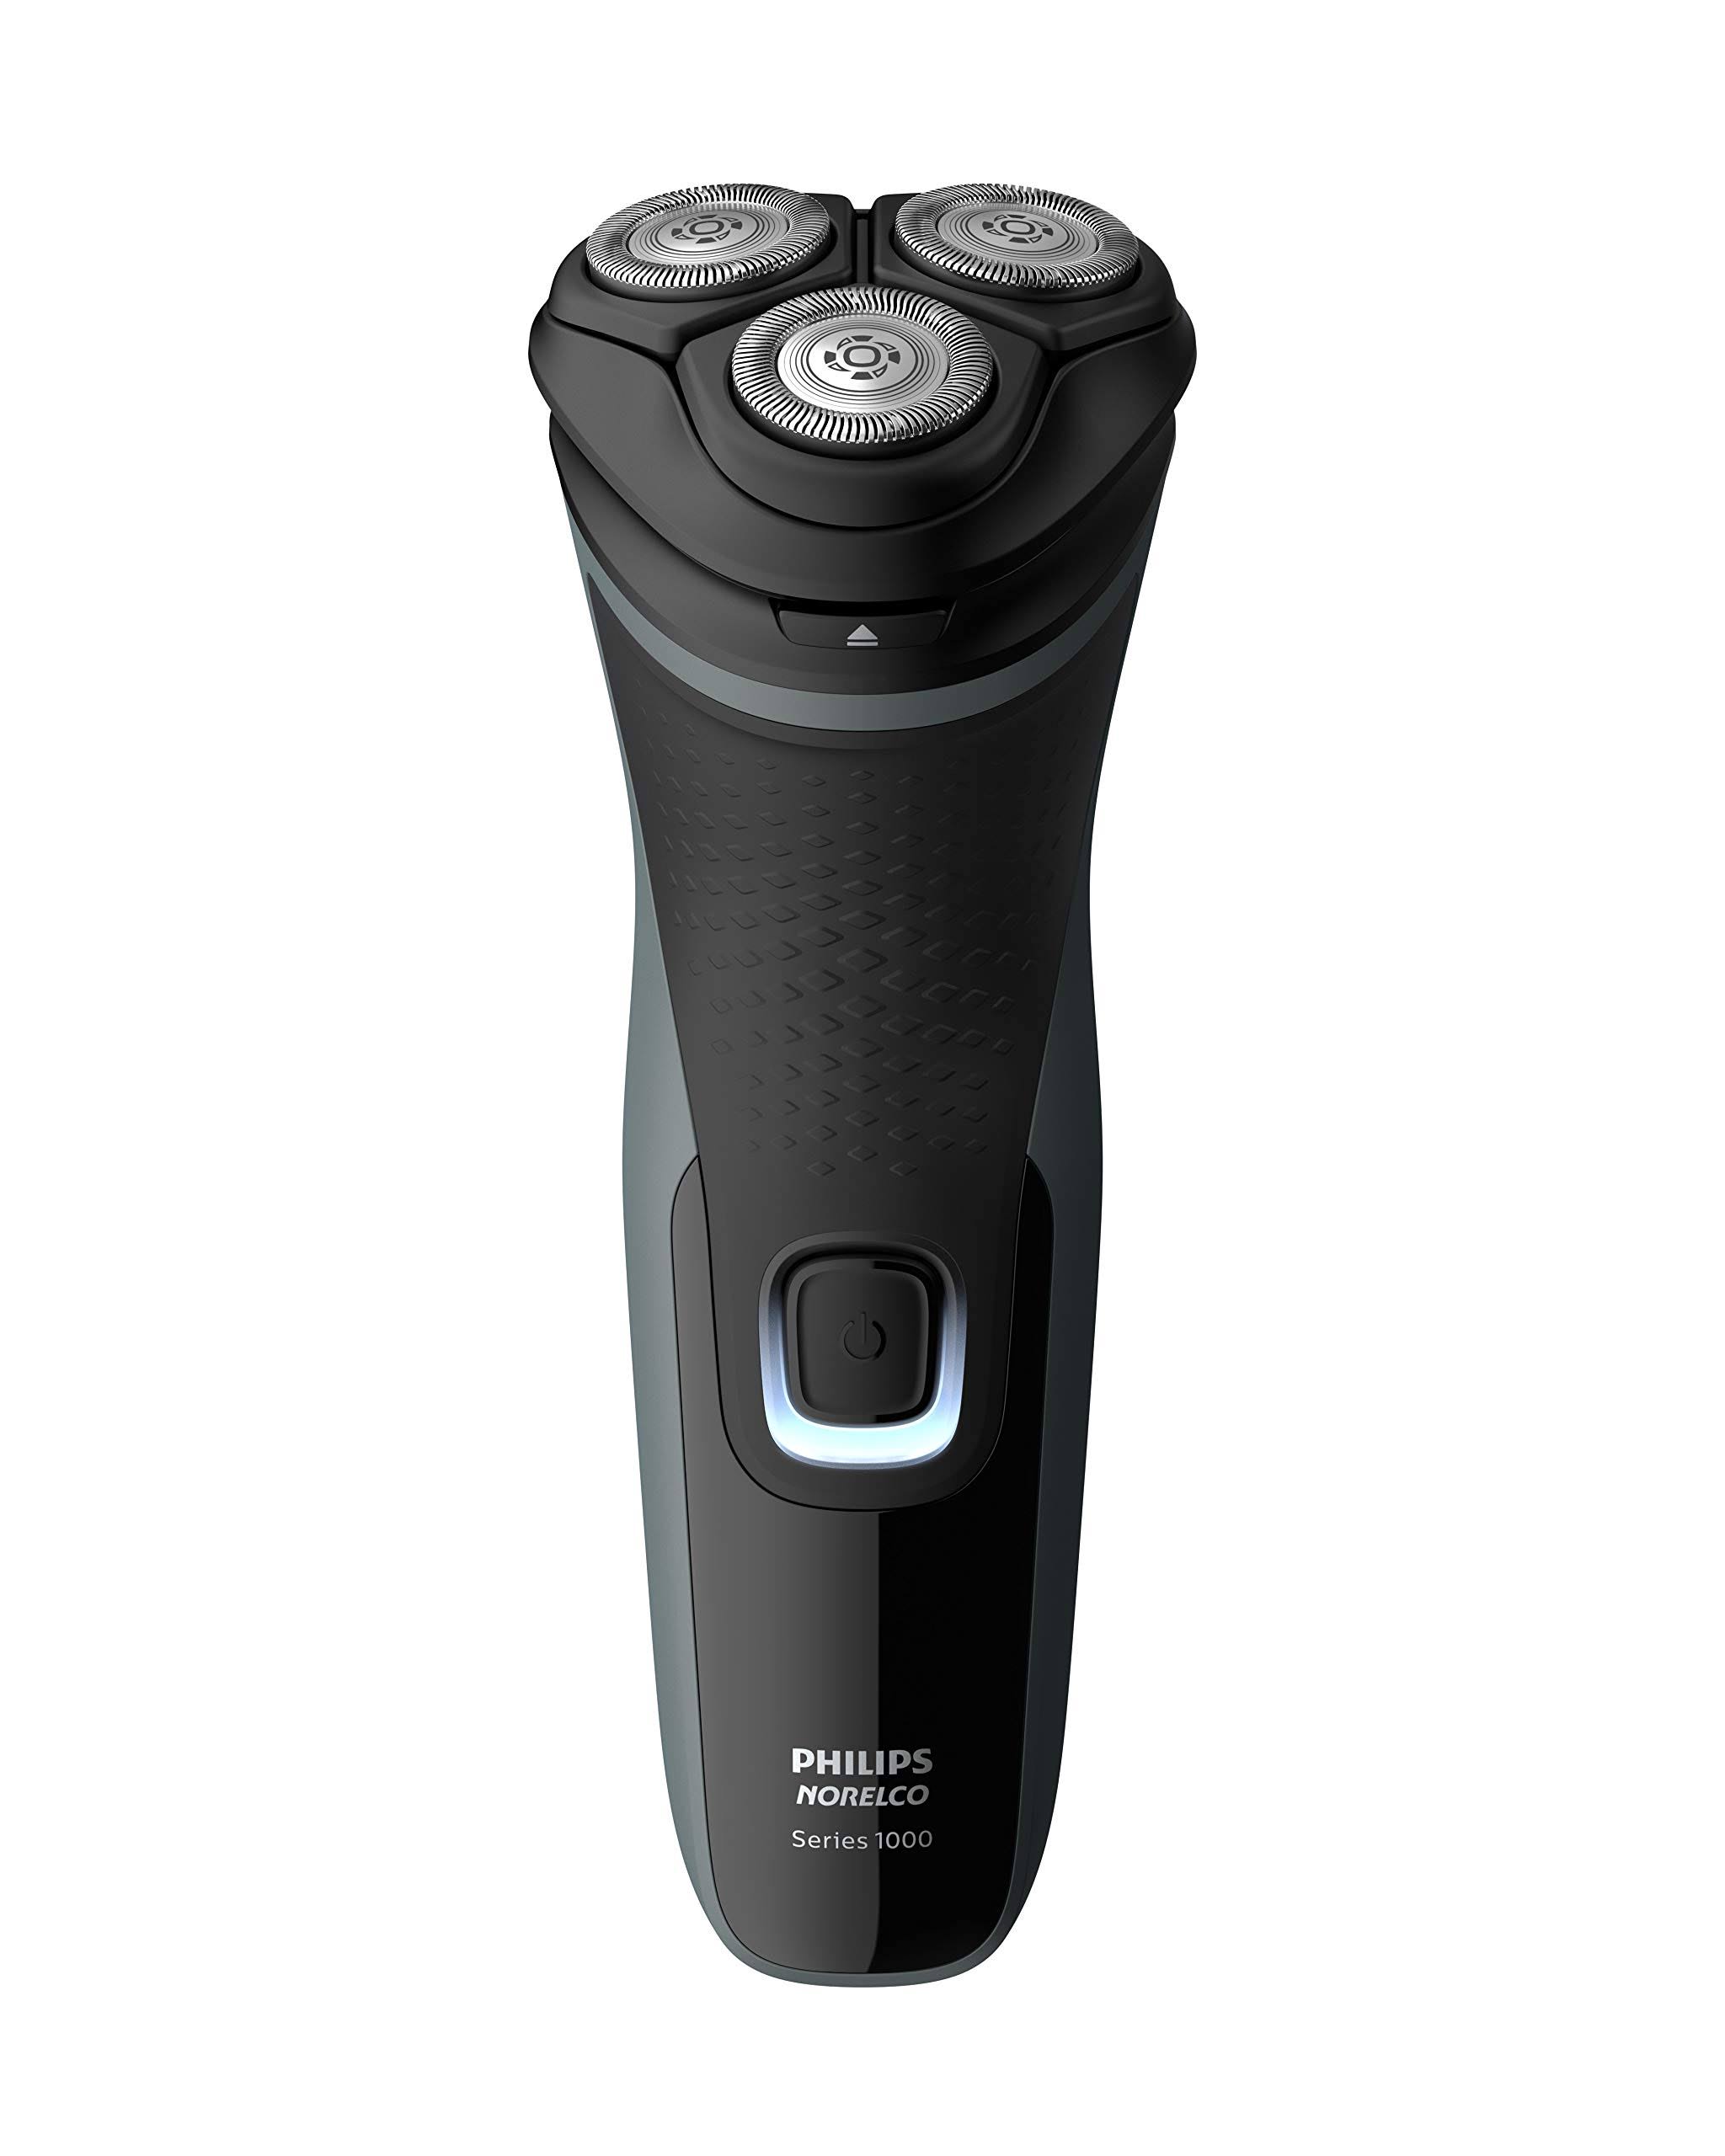 Norelco Shaver 2300, Rechargeable Electric Shaver with Pop-Up Trimmer, S1211/81